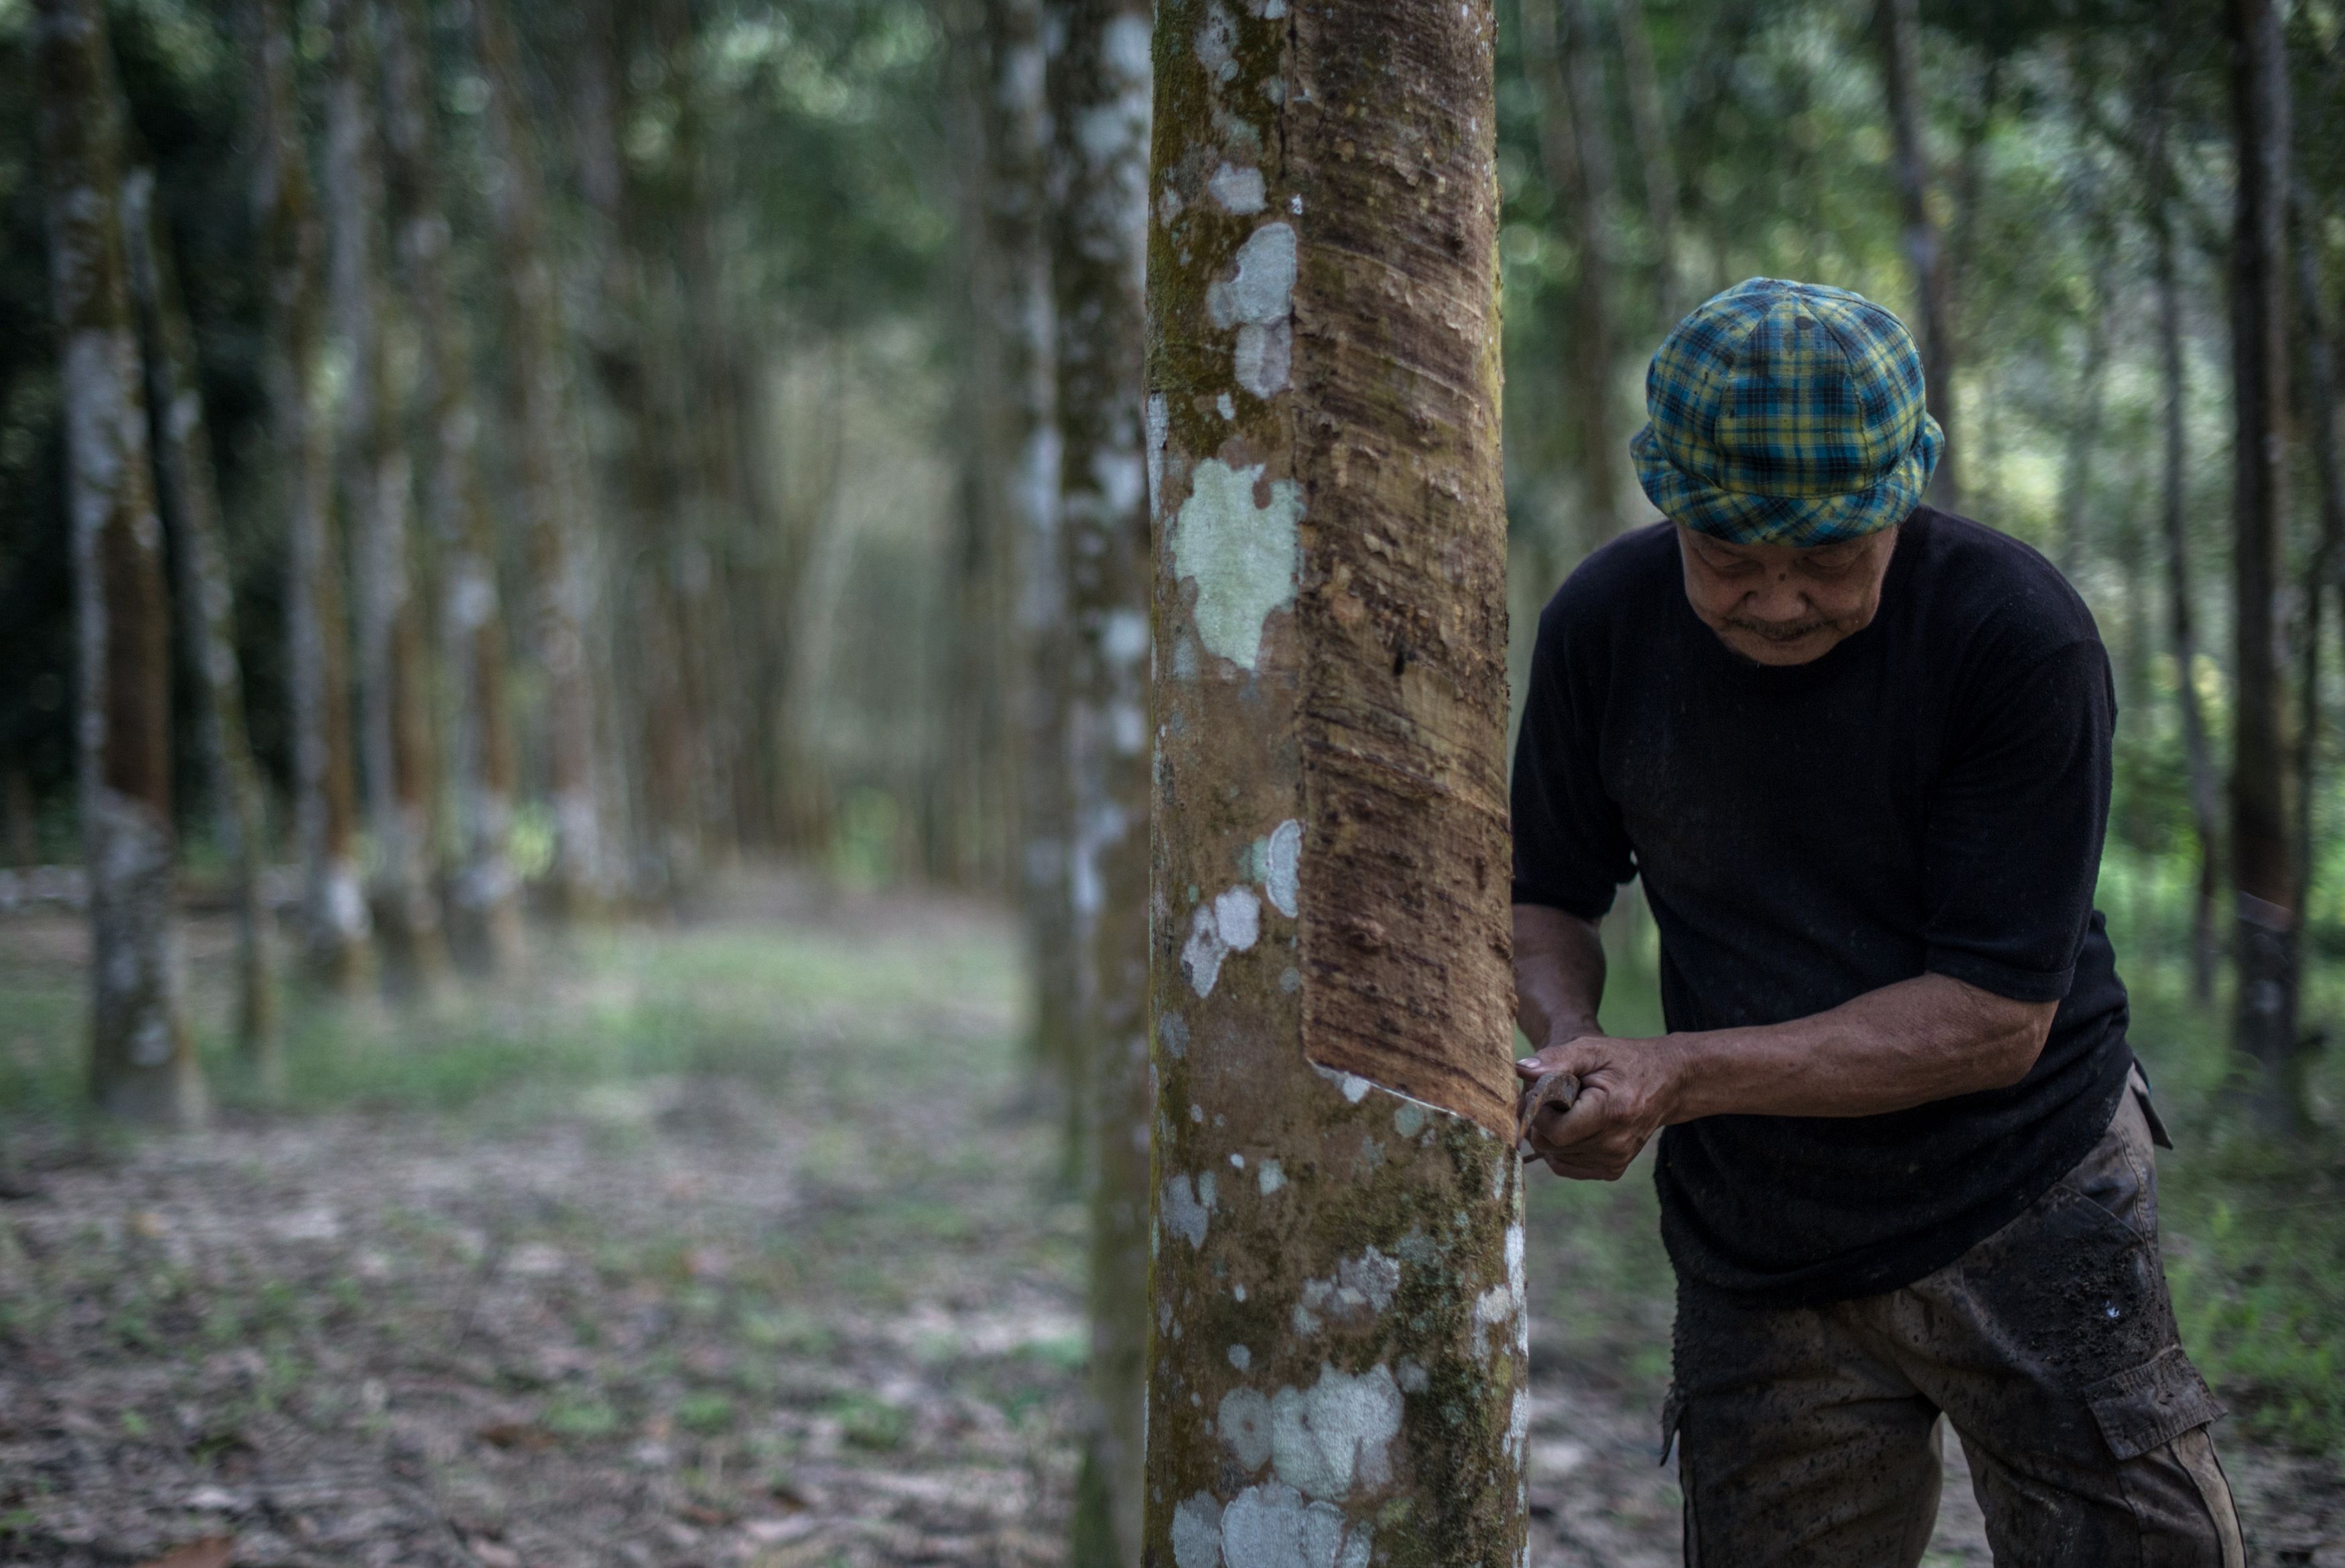 A worker collects raw latex from a rubber tree at a plantation in Pahang, outside Kuala Lumpur, Malaysia, on Jan. 12, 2016. (Mohd Rasfan/AFP/Getty Images)